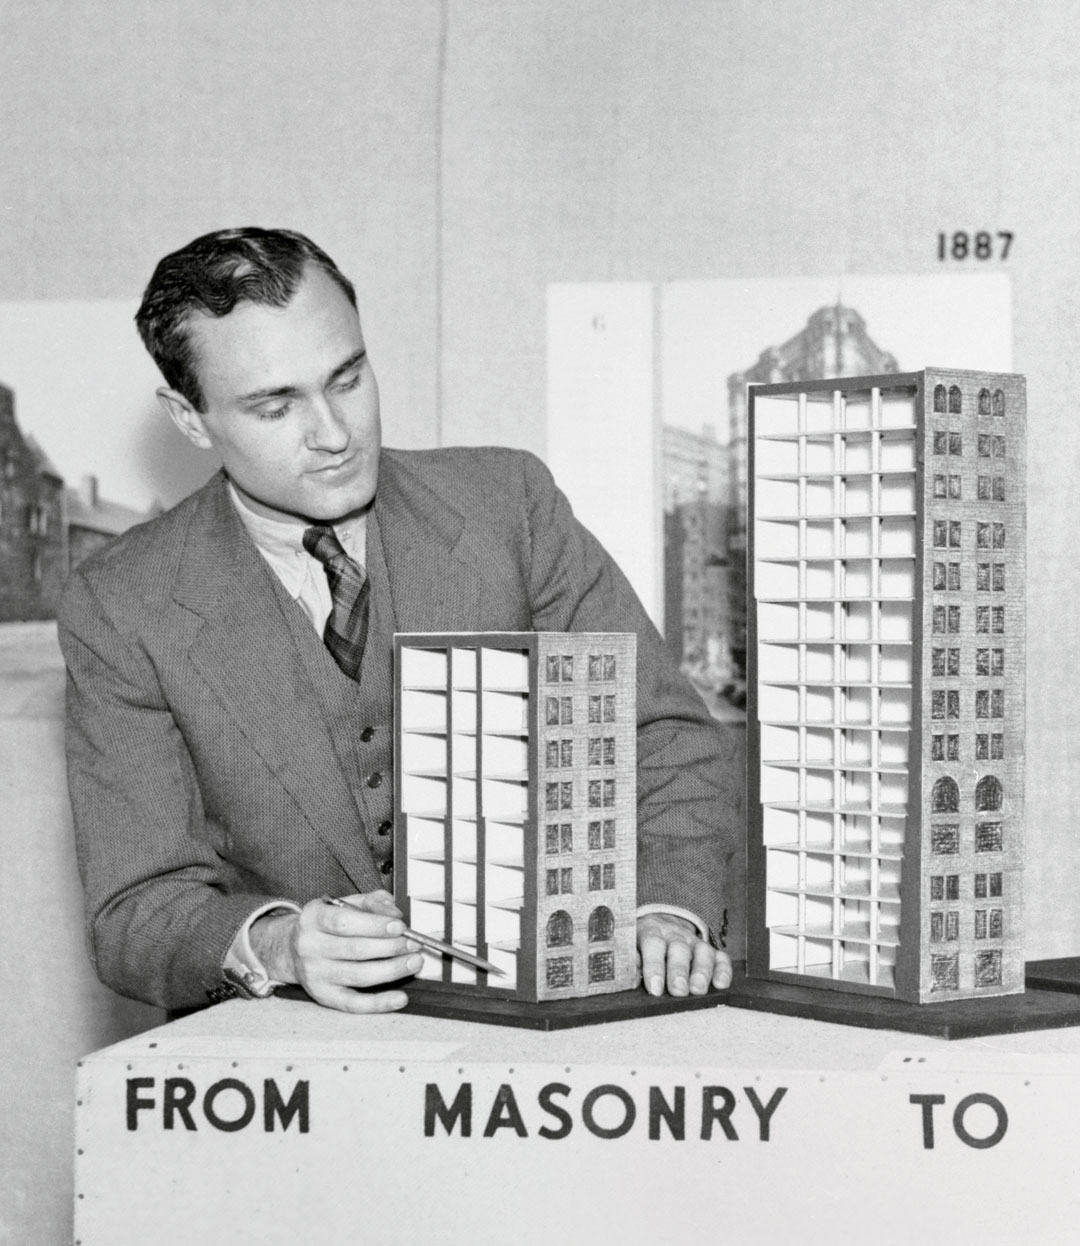 Philip Johnson with models demonstrating the evolution of the skyscraper from masonry to steel [detail]. Bettmann via Getty Images